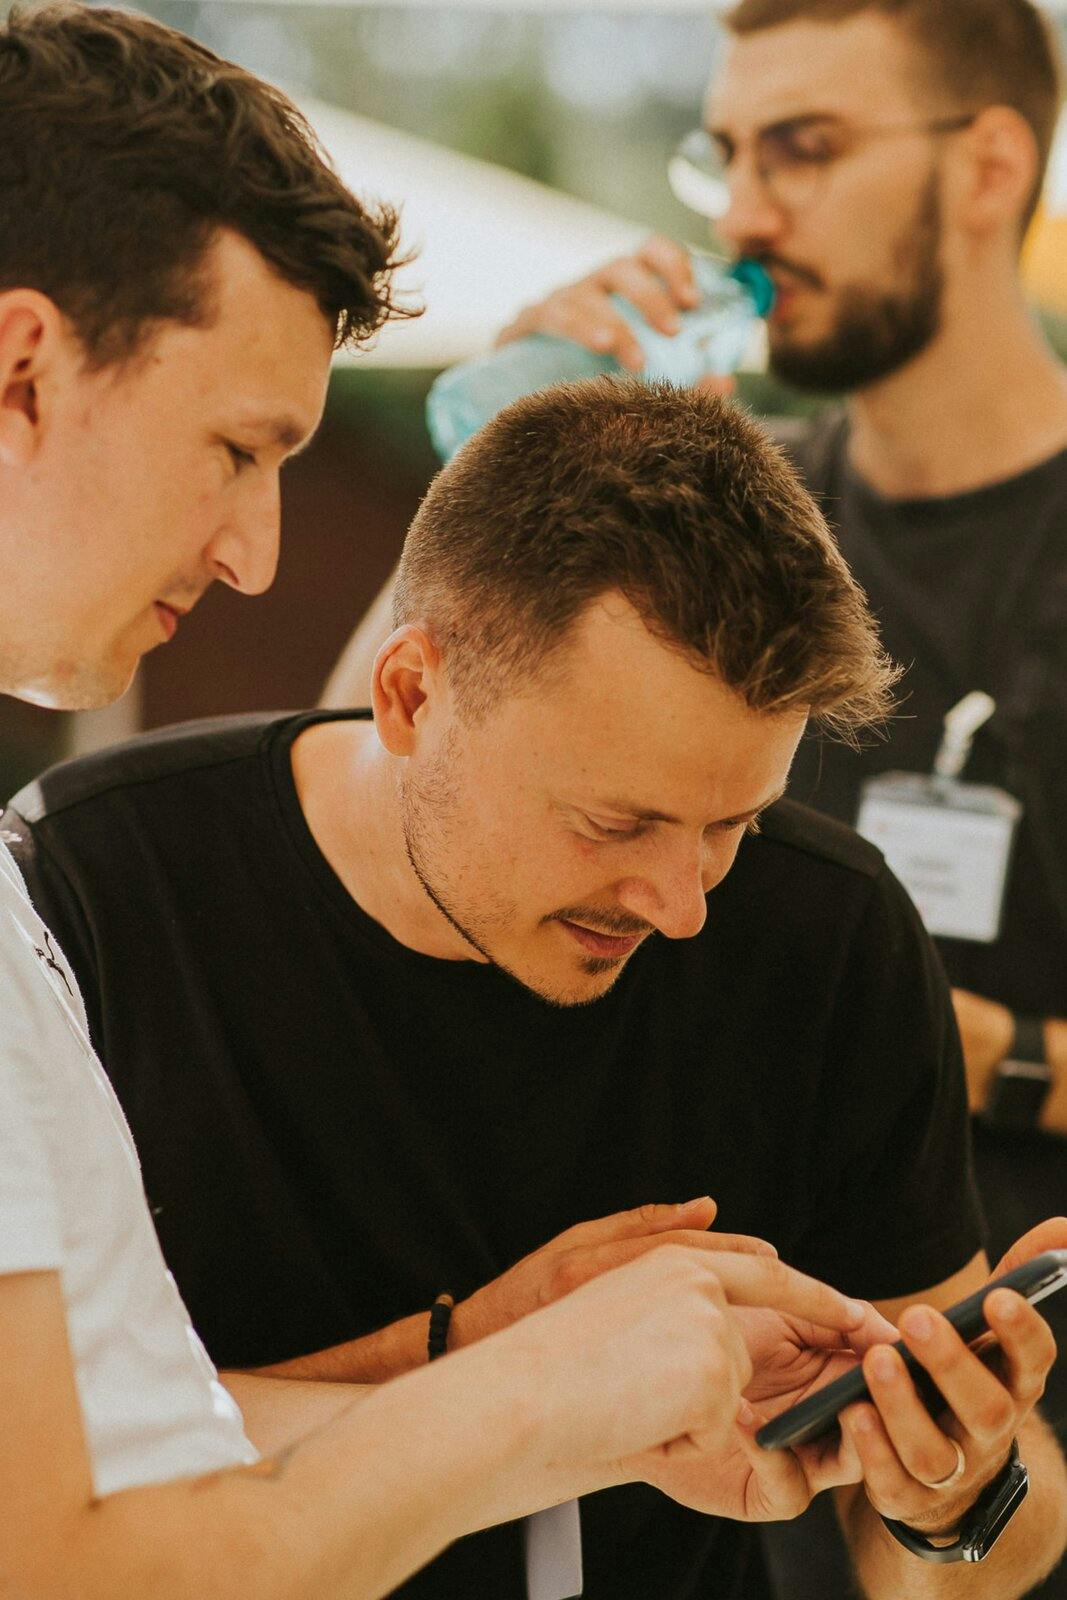 People inspecting an app on a mobile phone